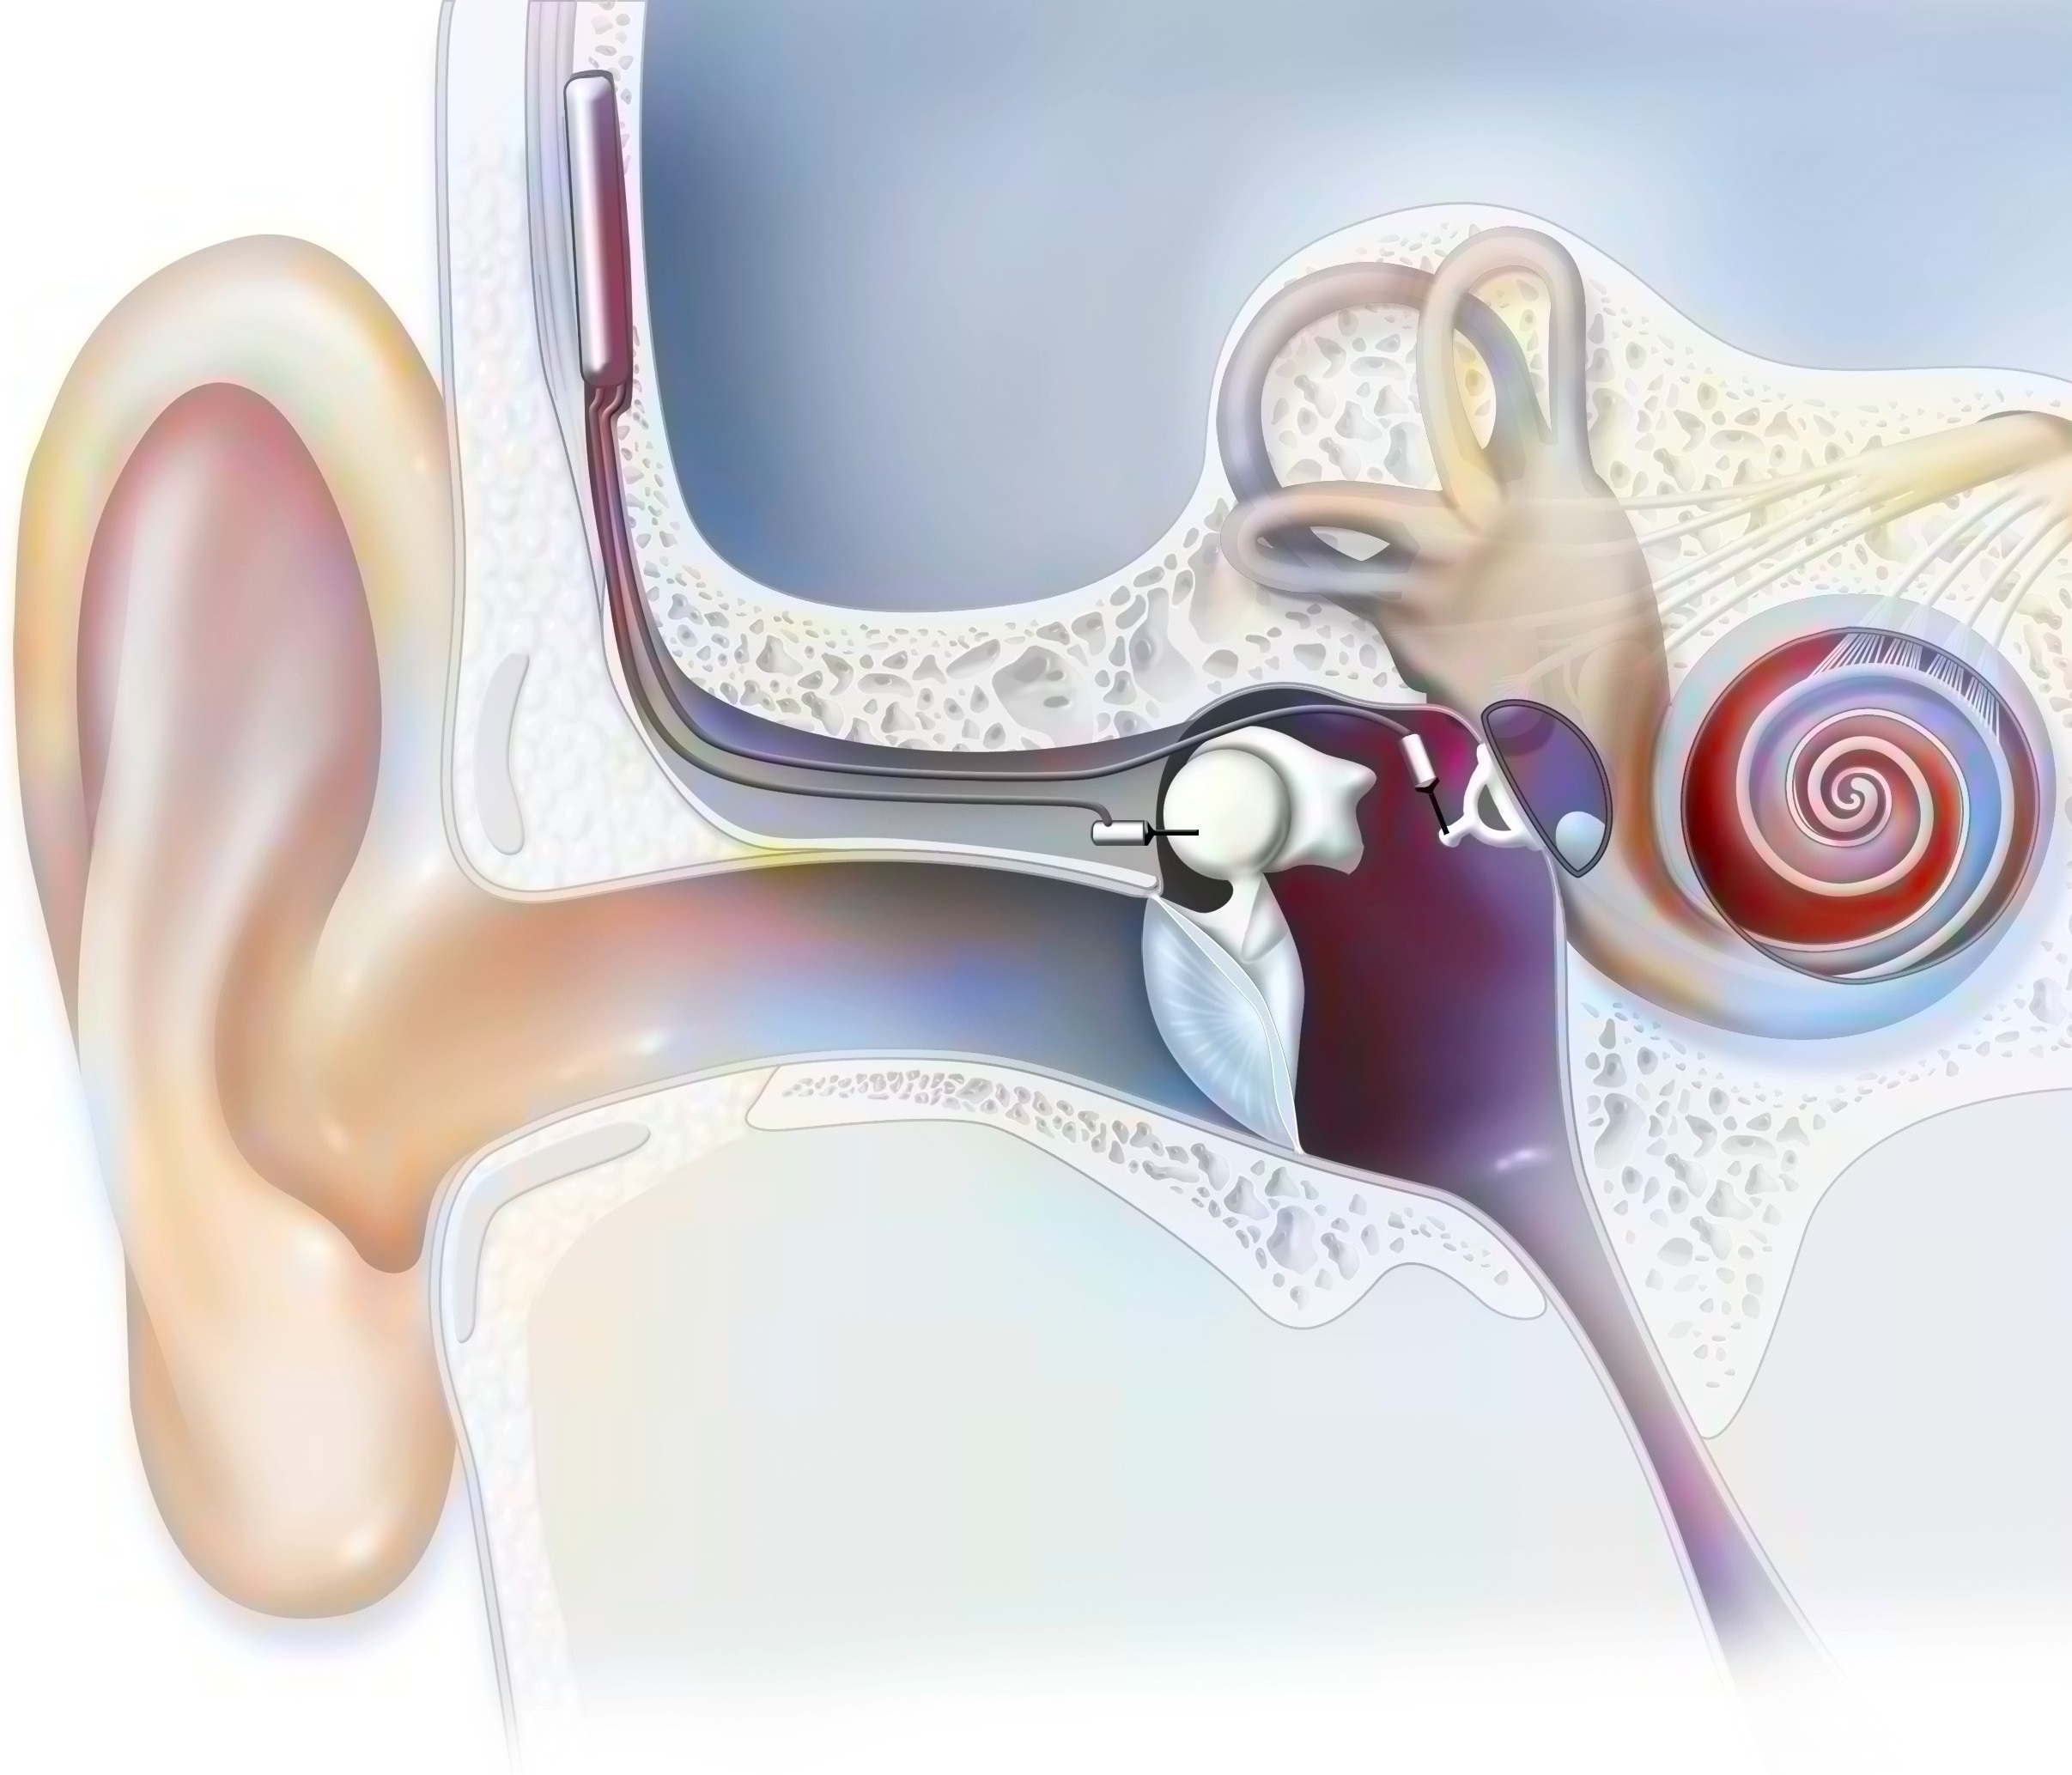 Diagram of inner ear showing implantable cochlea device.